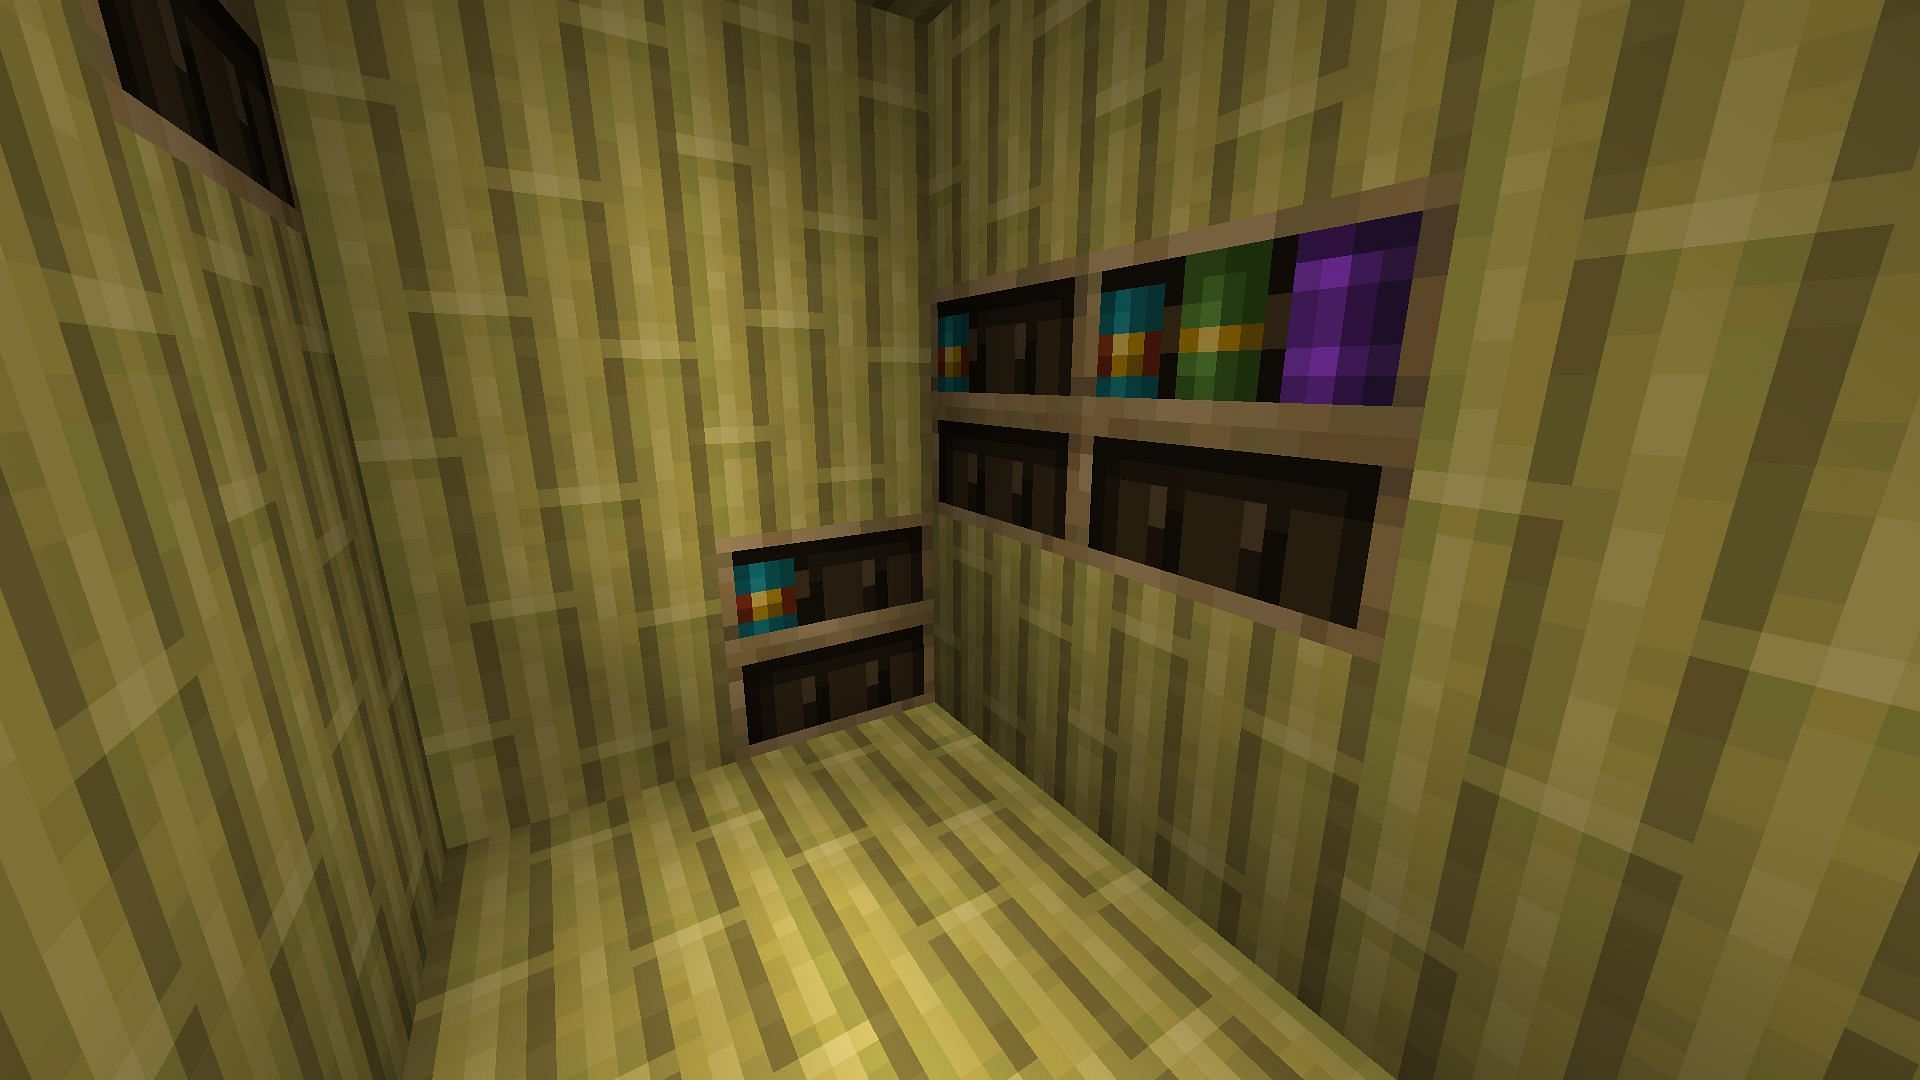 Players can take out any individual book from a chiseled bookshelf in the game (Image via Mojang)